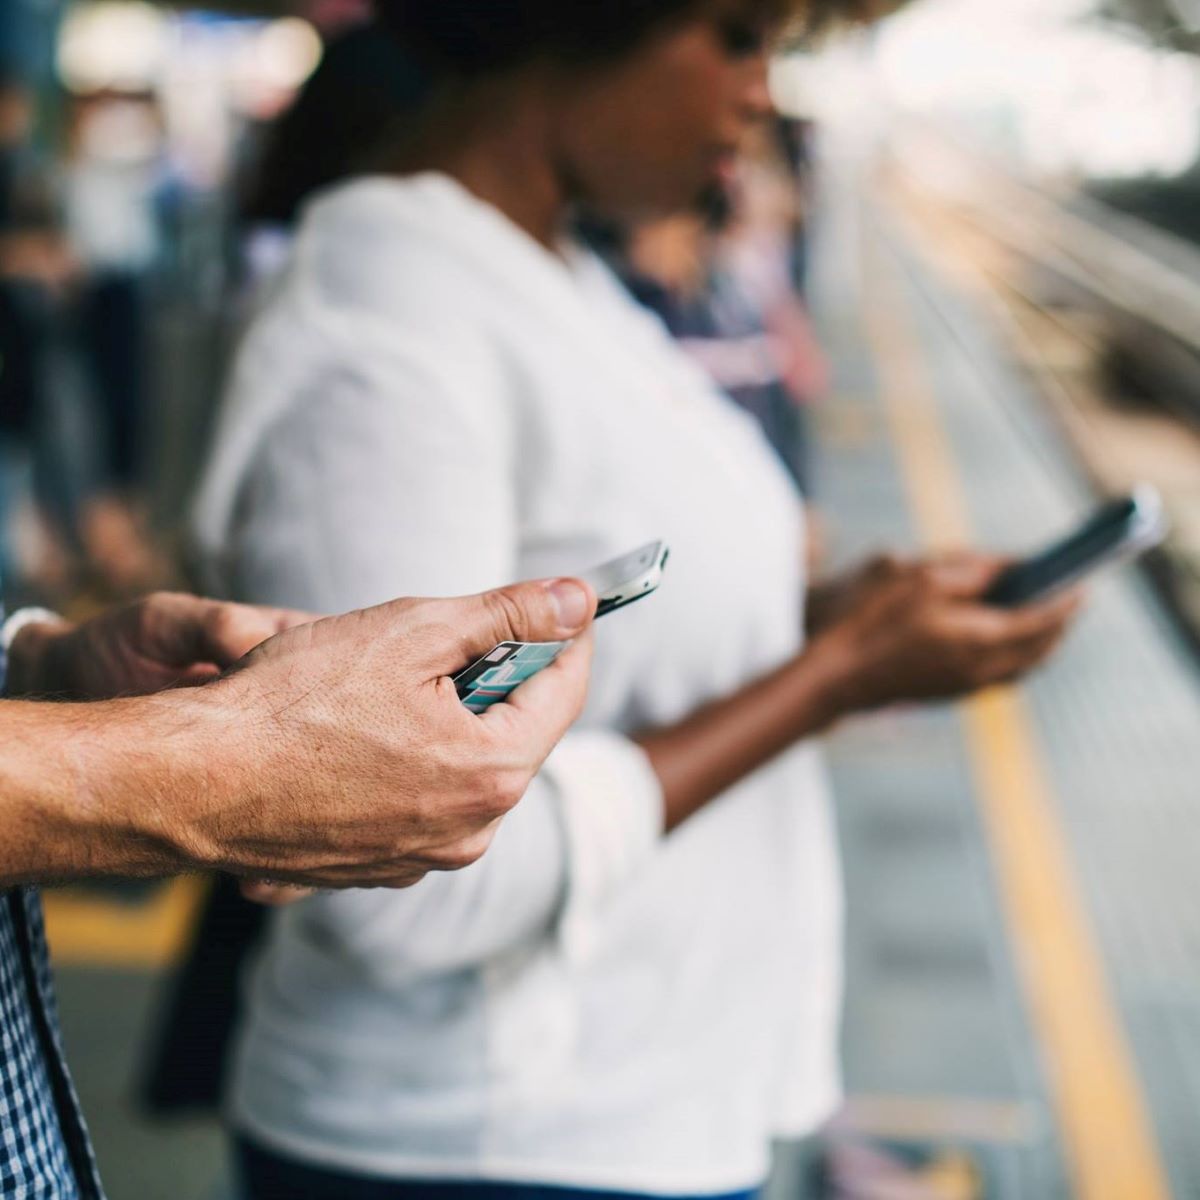 Two people look at the Single Stop app on their smartphones while waiting for a train.